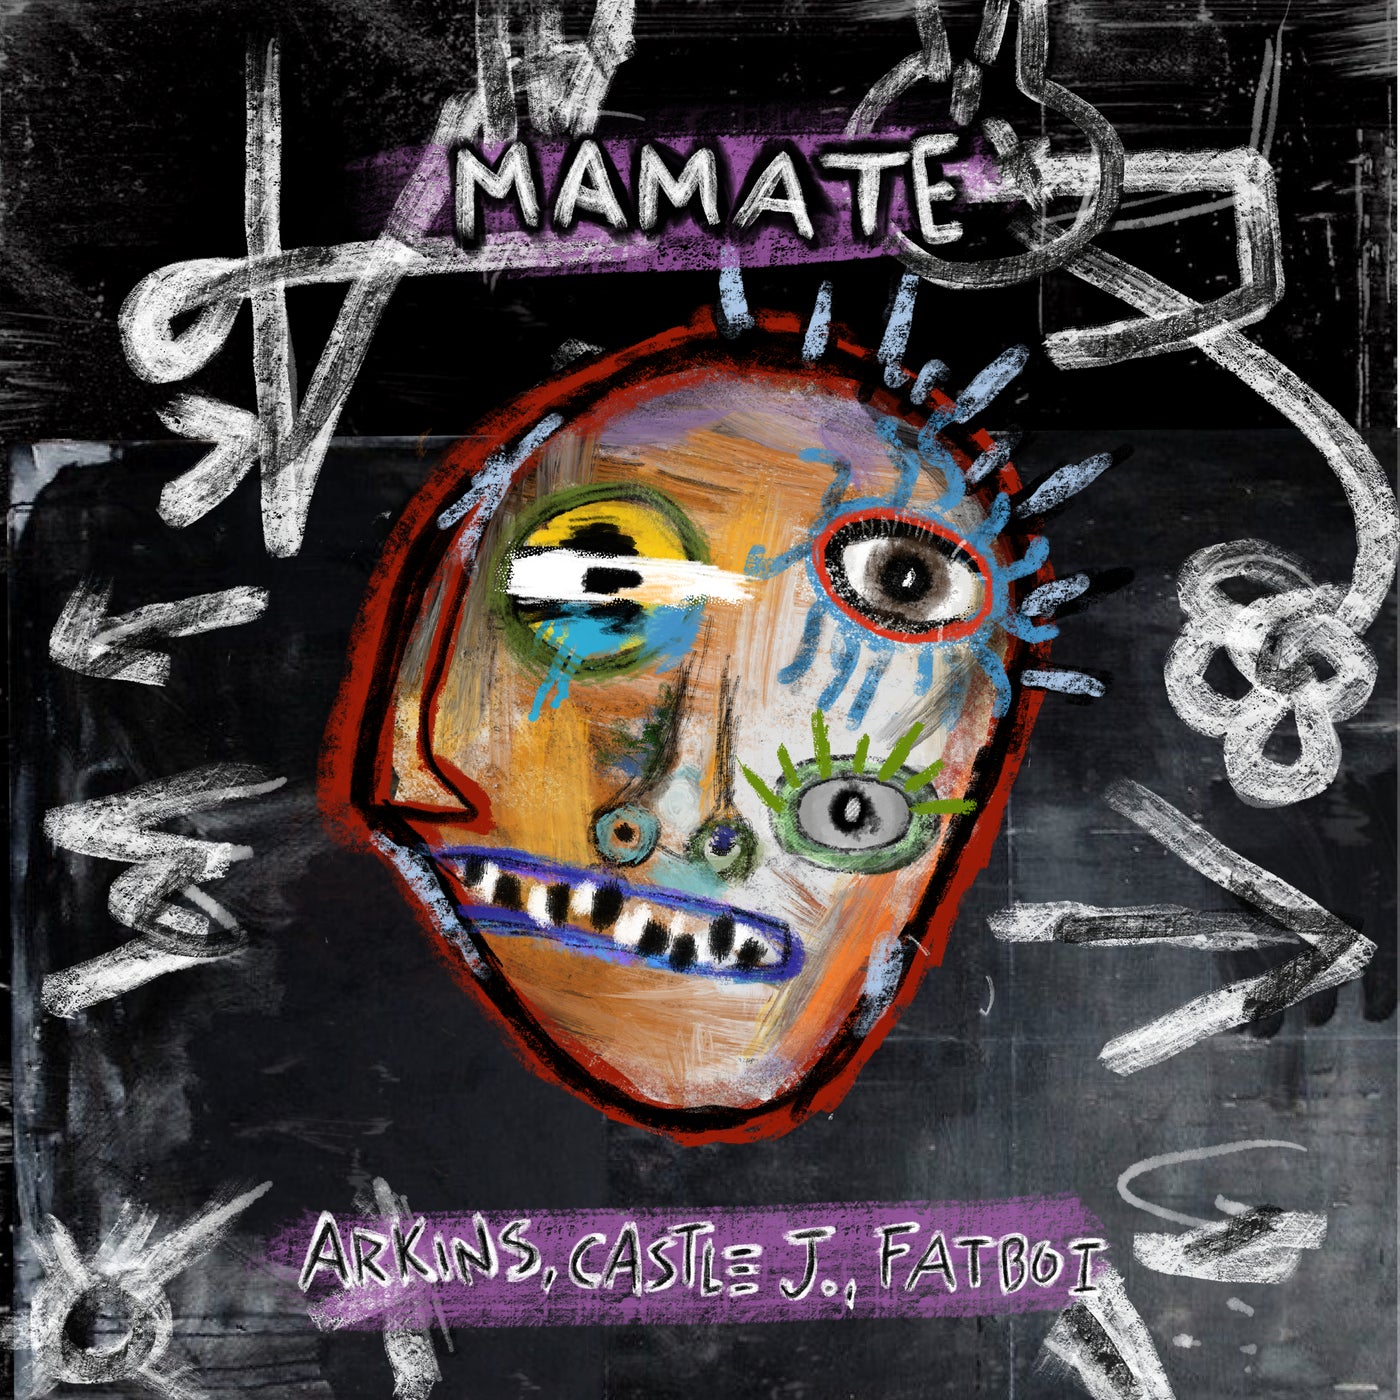 image cover: Castle J, Arkins, Fatboi - Mamate on Drop Low Records